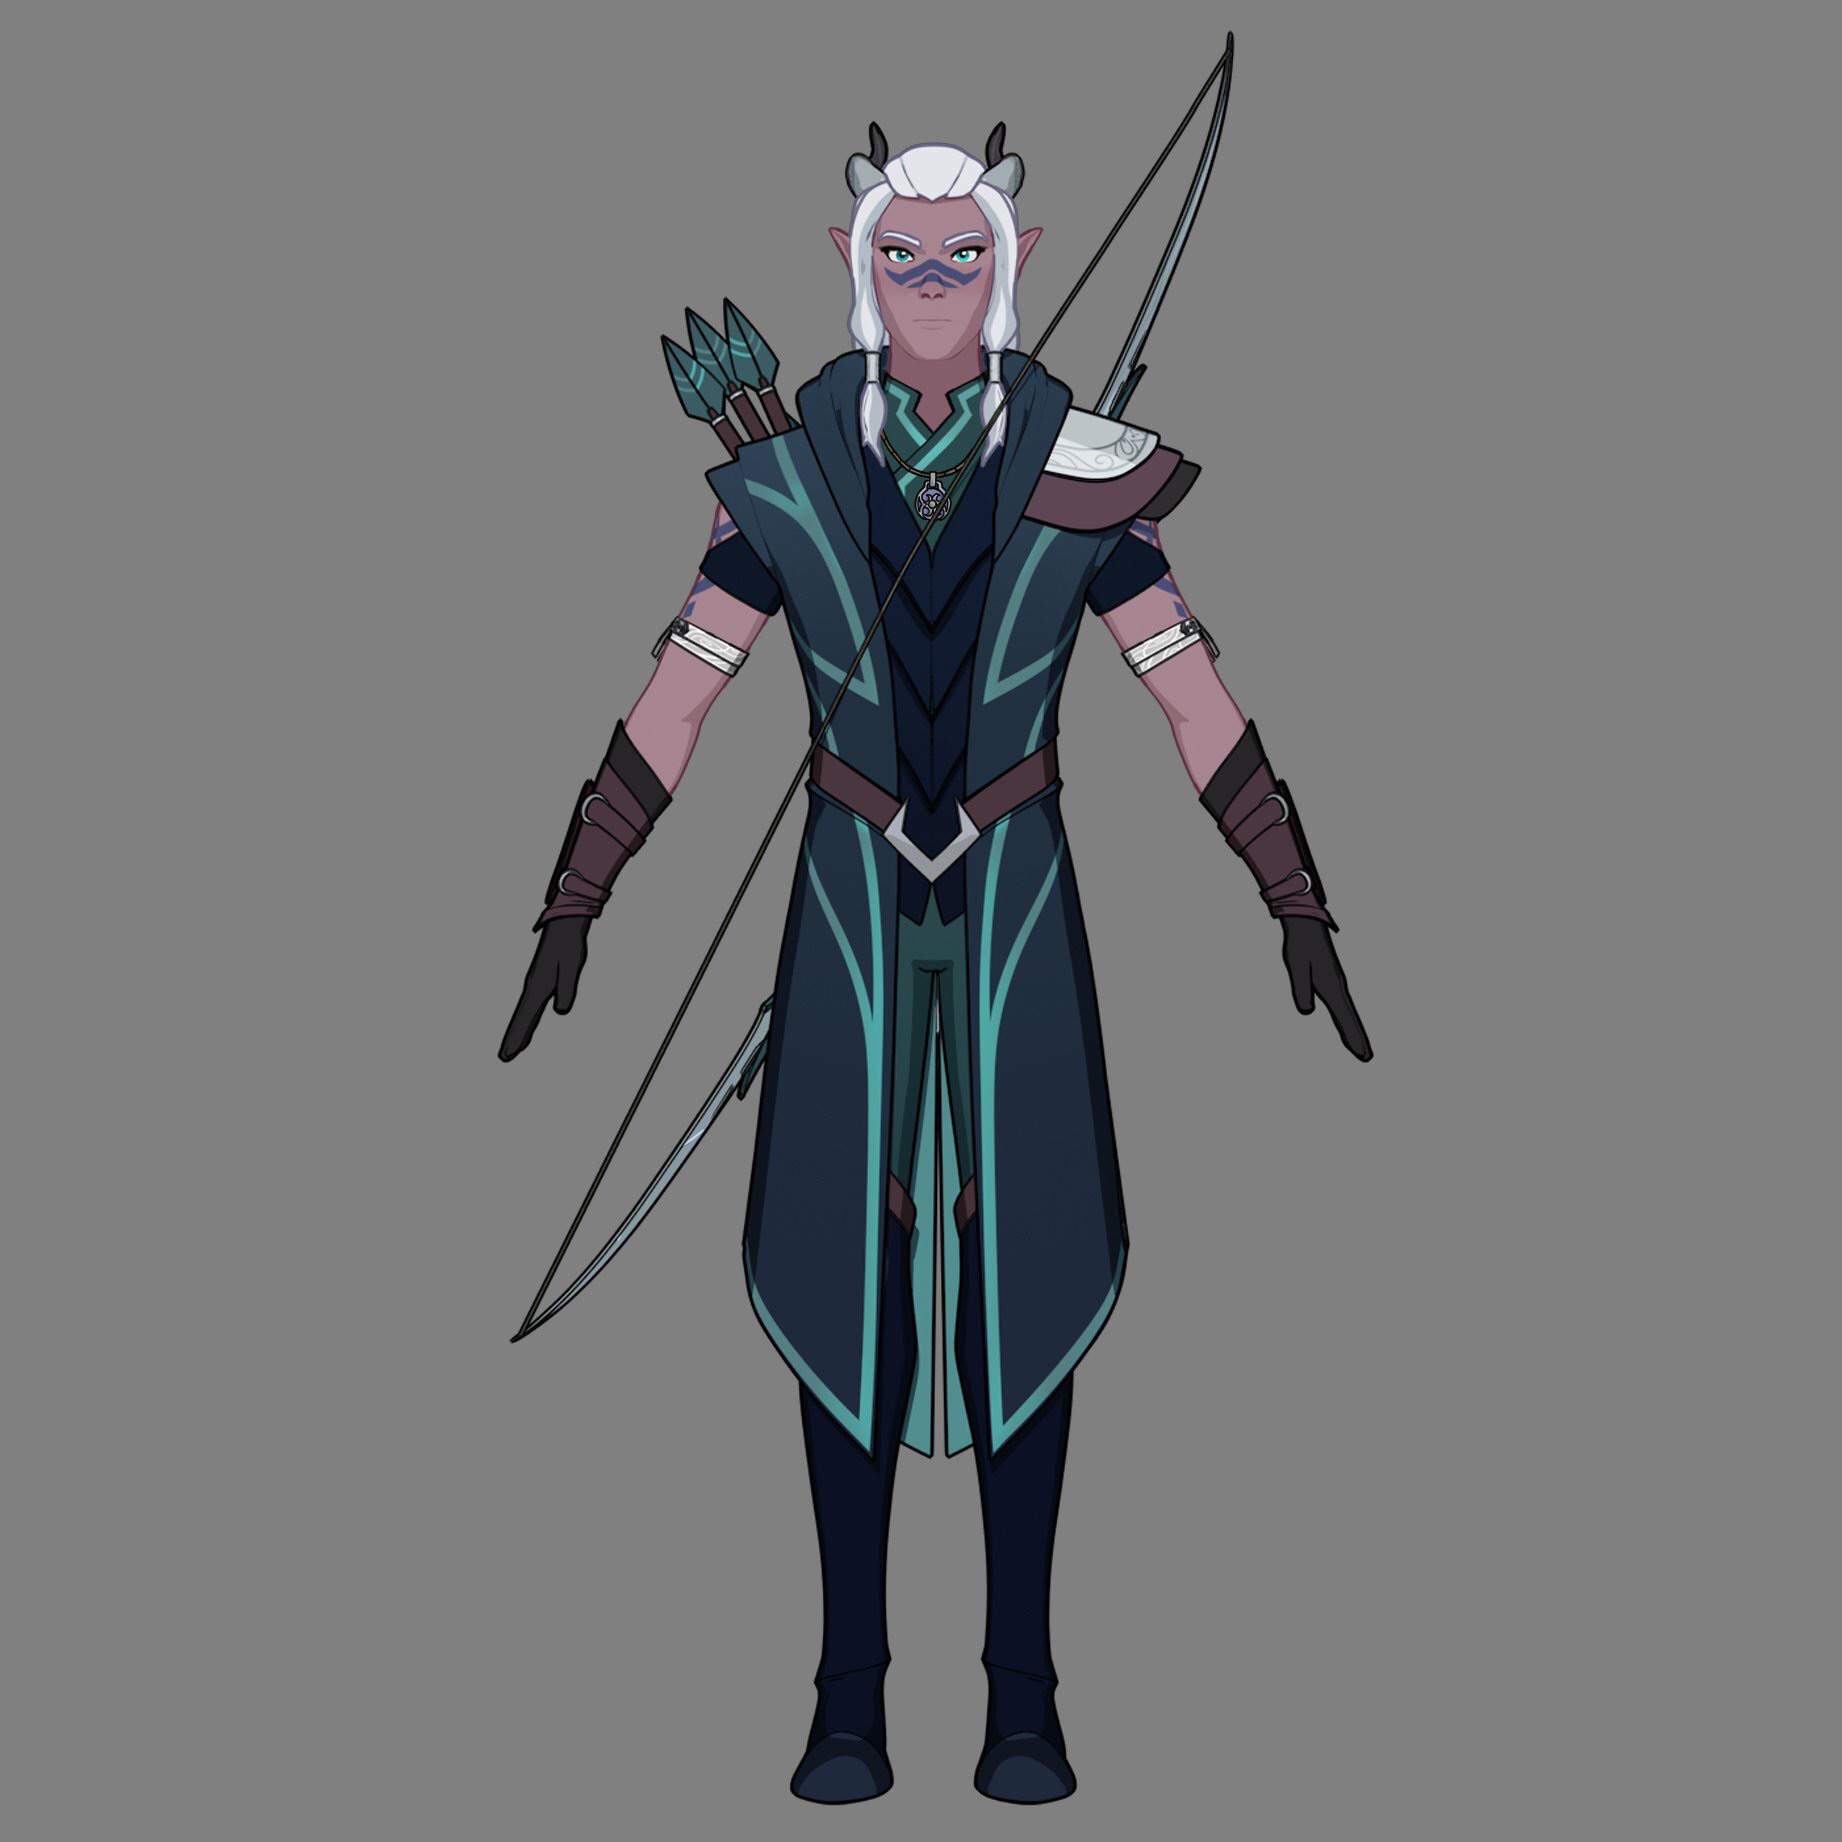 The stern and deadly leader of the moon shadow elf assassins, Runaan will n...